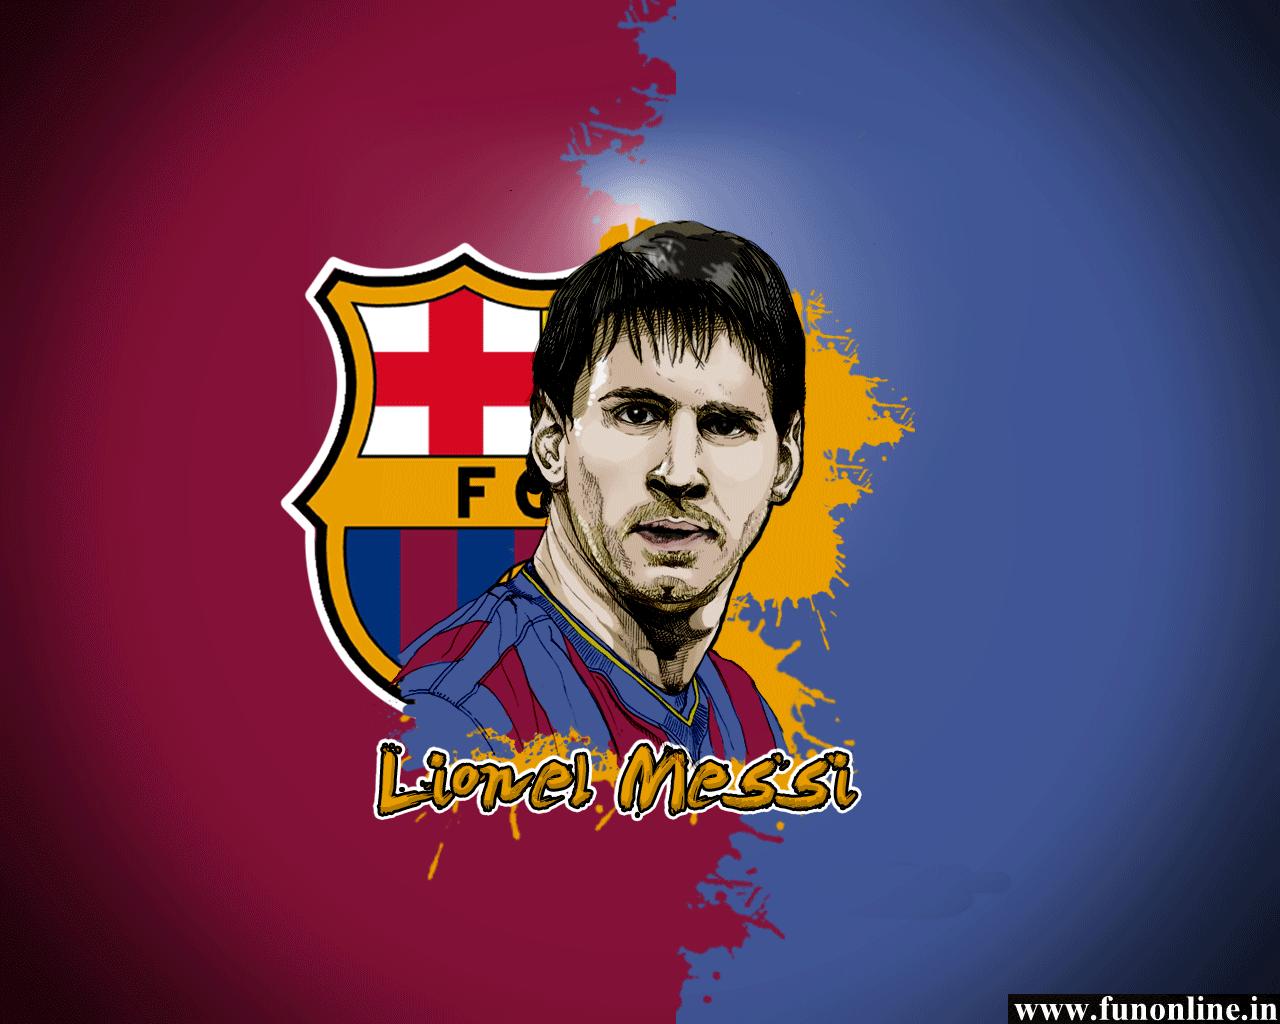 Lionel Messi Wallpapers Download Amazing Lionel Messi HD Wallpaper 1280x1024